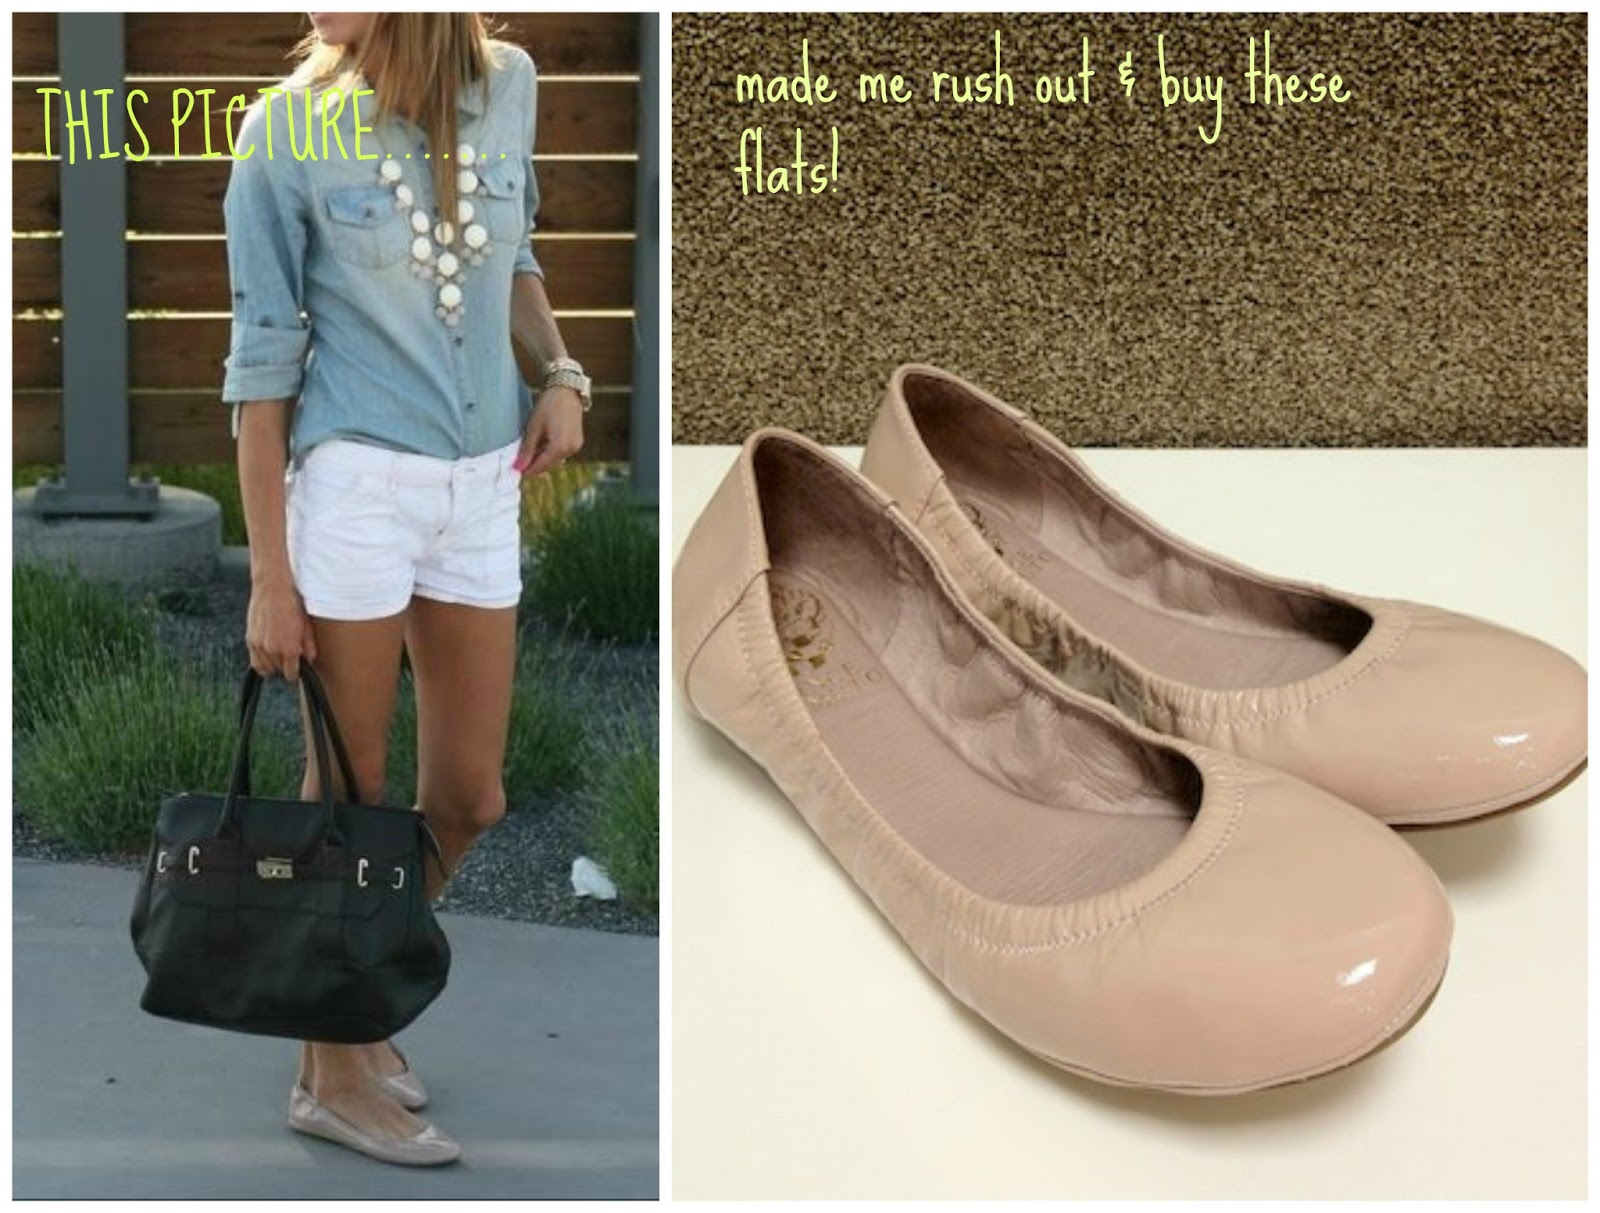 nude color flats